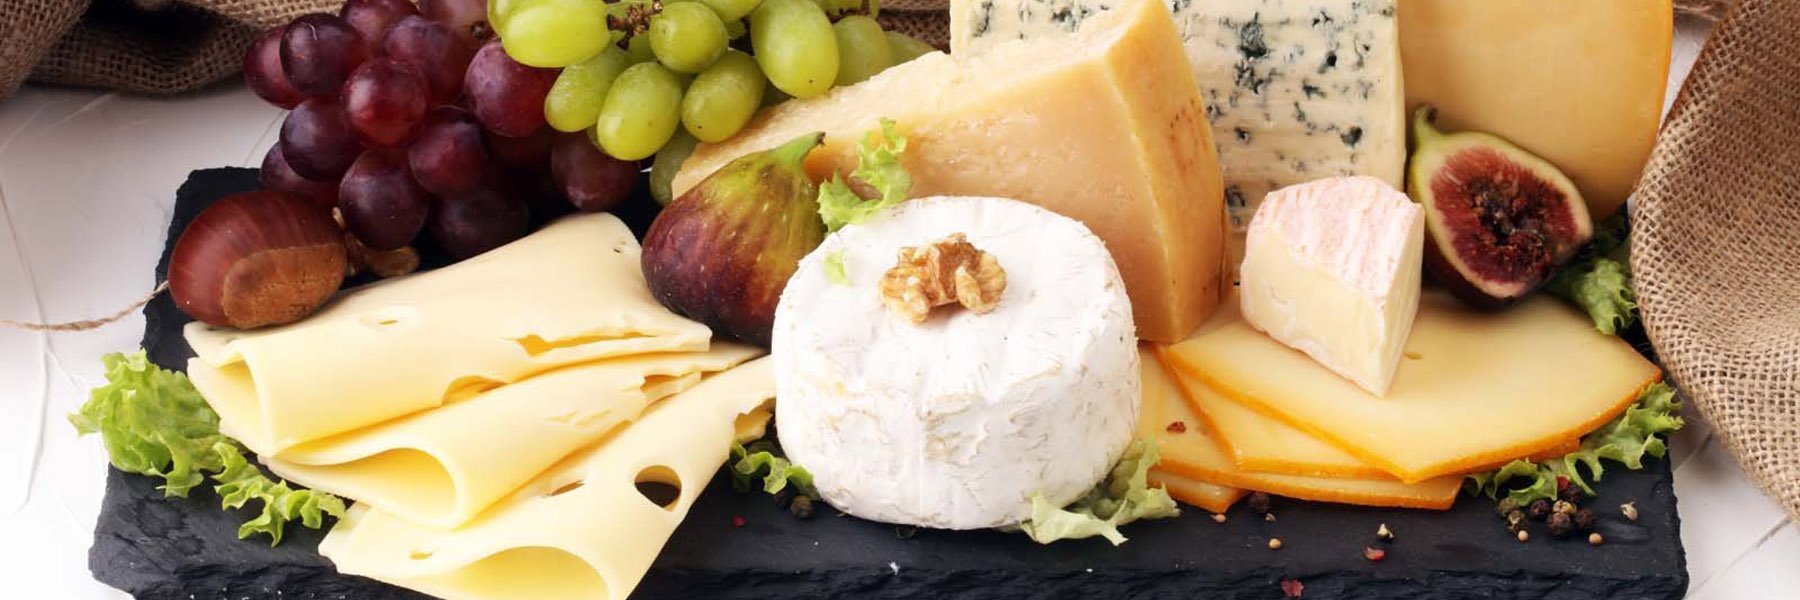 American Cheese Gifts & Platters